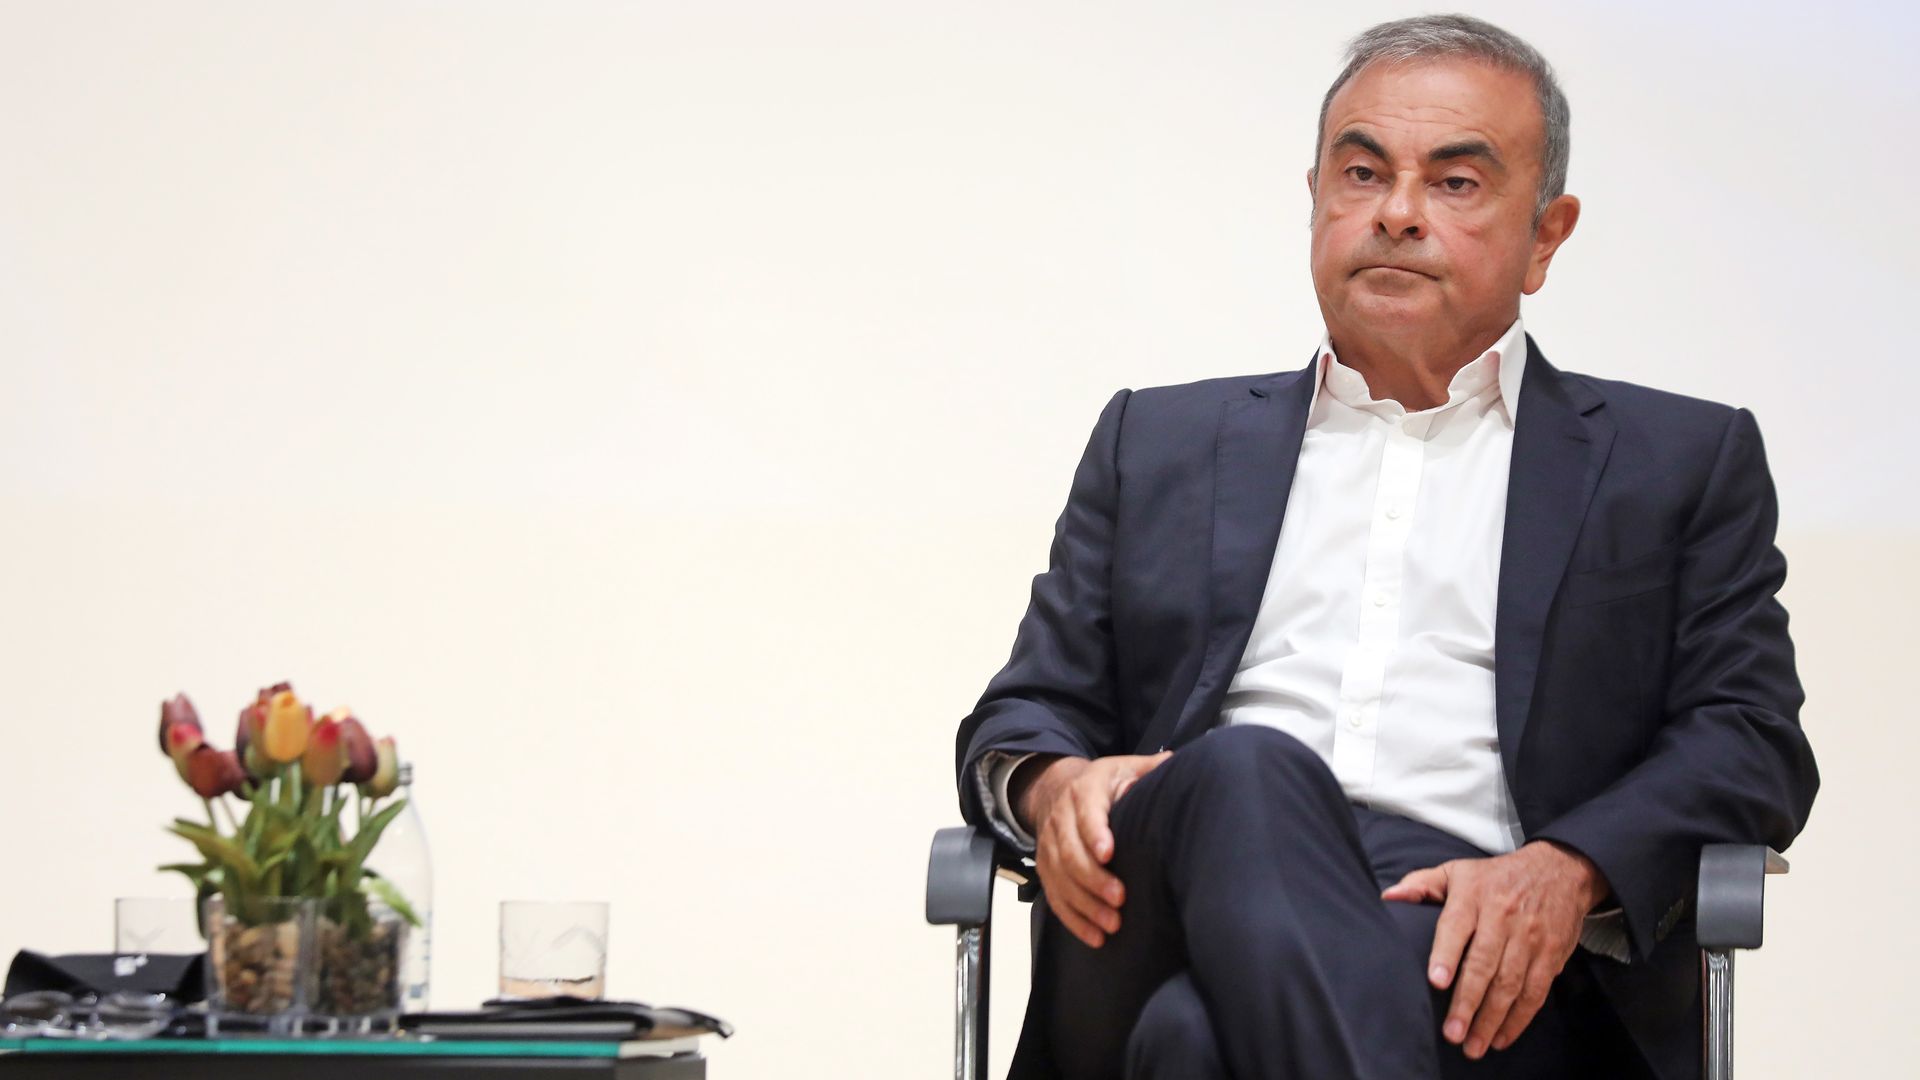 Carlos Ghosn, former Nissan chief executive officer, pauses during a news conference at the Holy Spirit University of Kaslik (USEK) in Jounieh, Lebanon, on Tuesday, Sept. 29